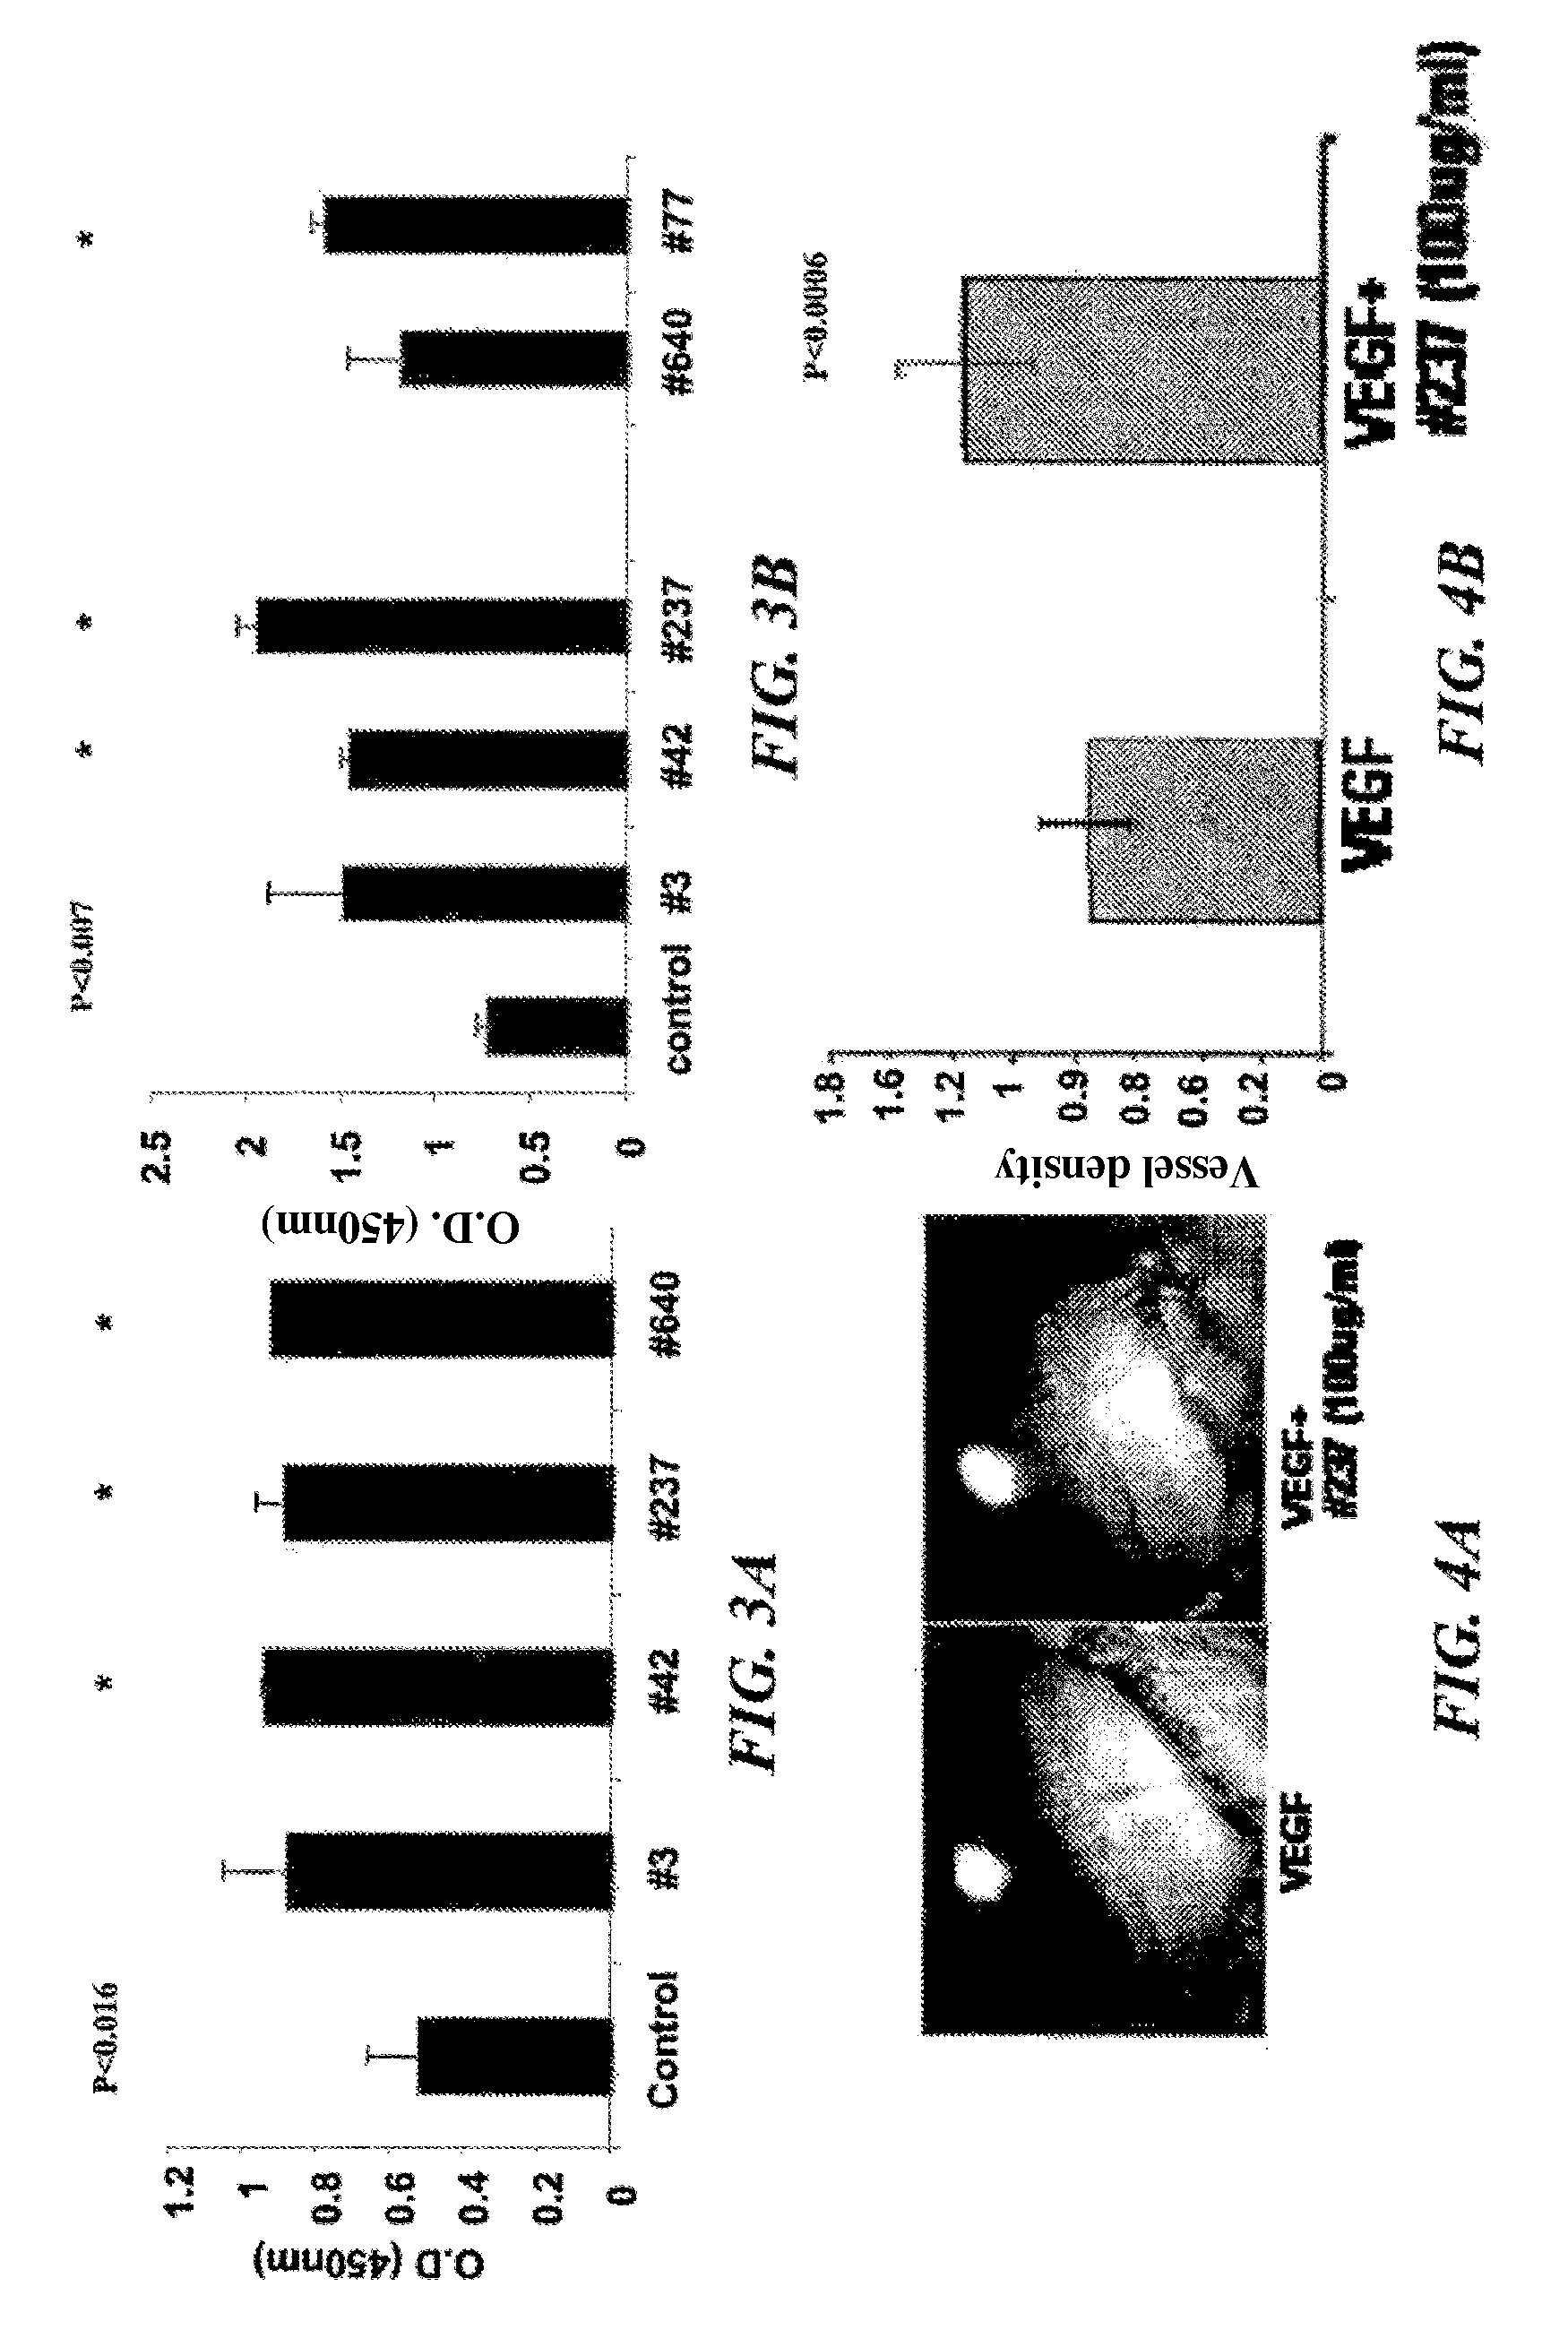 Pro-angiogenic fragments of prominin-1 and uses thereof